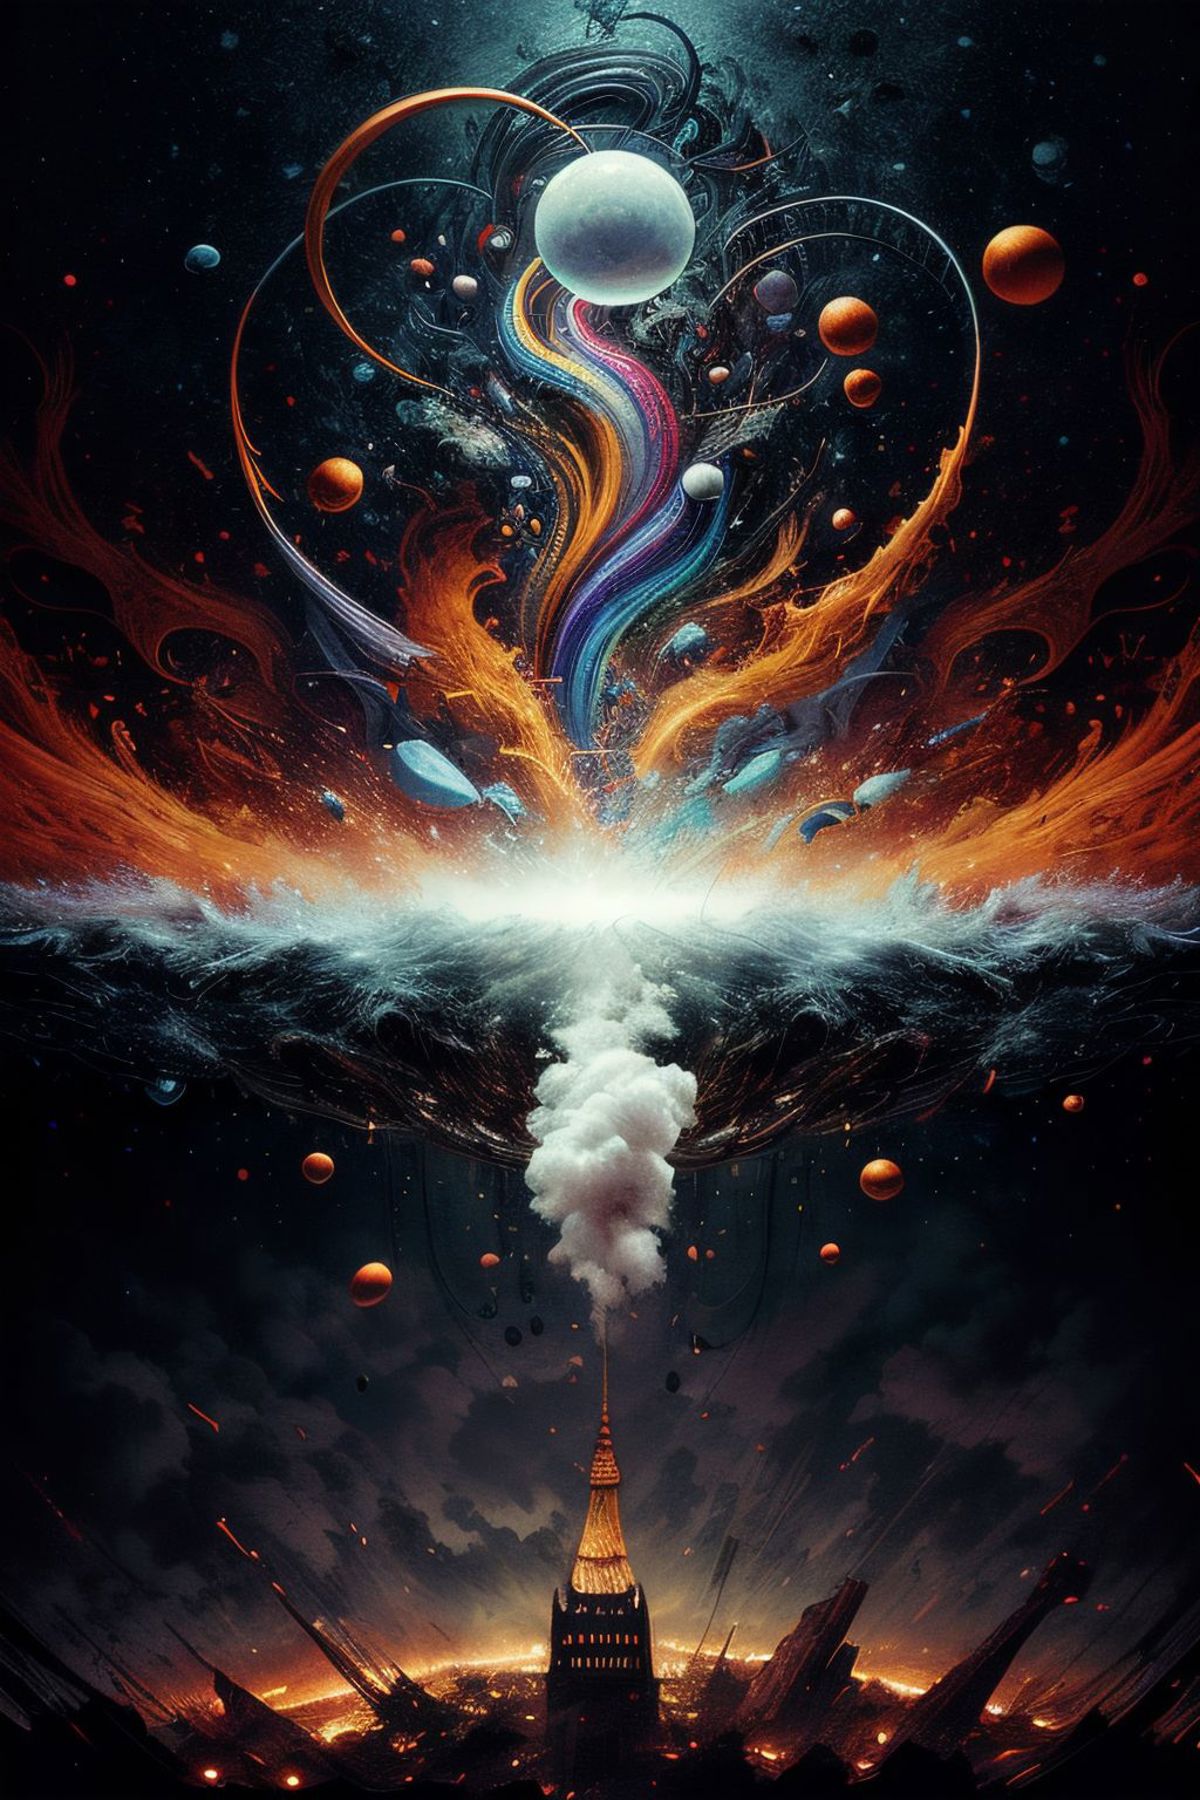 A Vibrant and Colorful Abstract Artwork with a Volcano